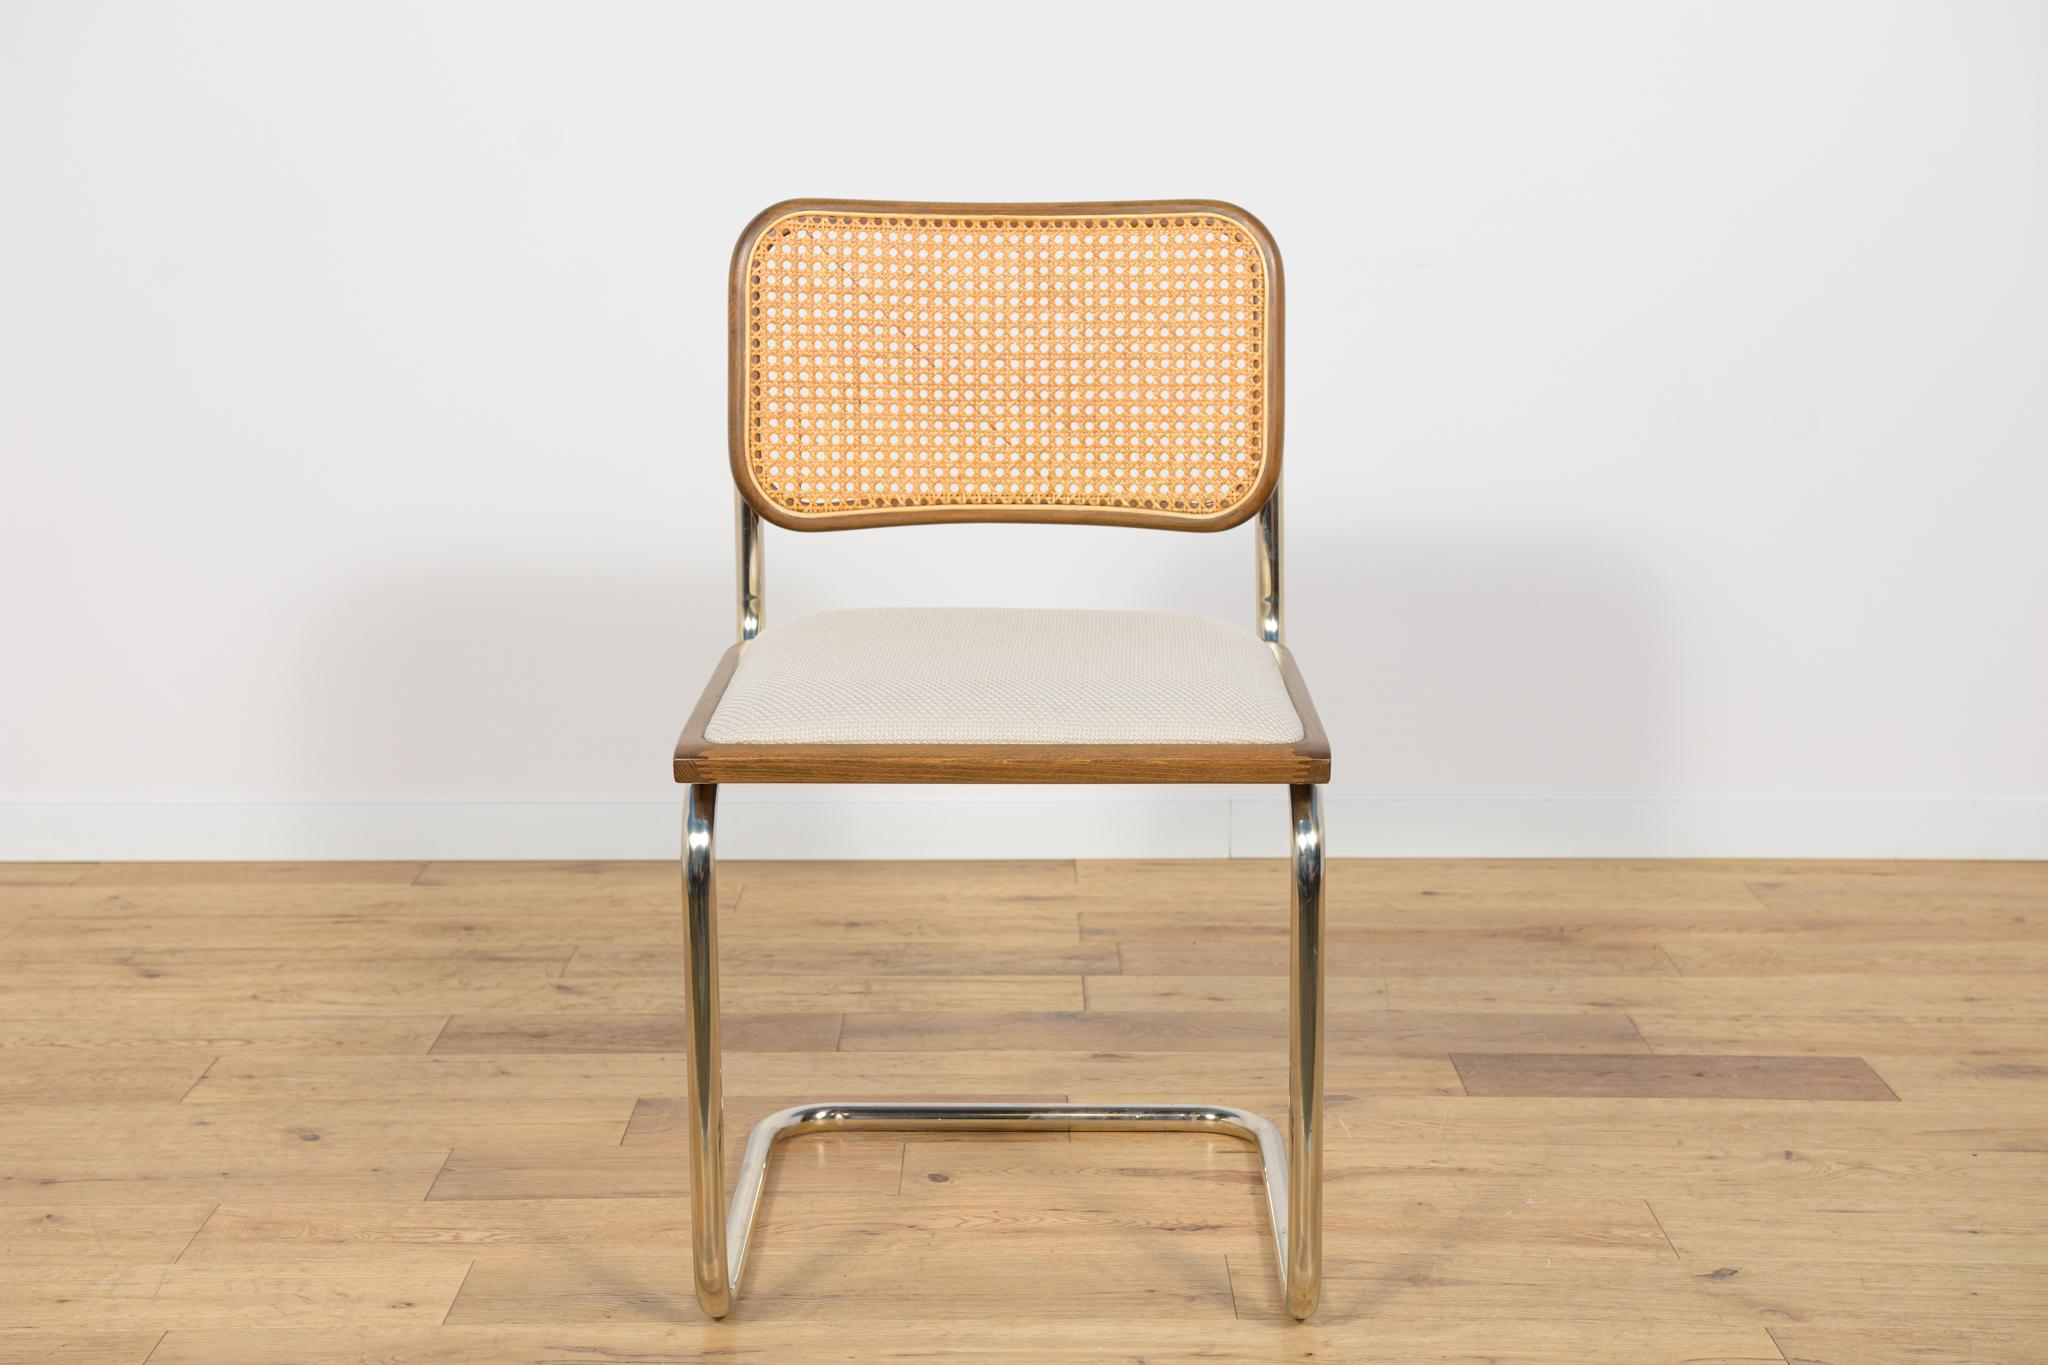 Cesca-type chair, modeled on Marcel Breuer's design from 1928. Produced in the 1980s. The chrome-plated frame is in very good original condition, has been cleaned and polished. The joinery has been professionally renovated, the beech wood has been